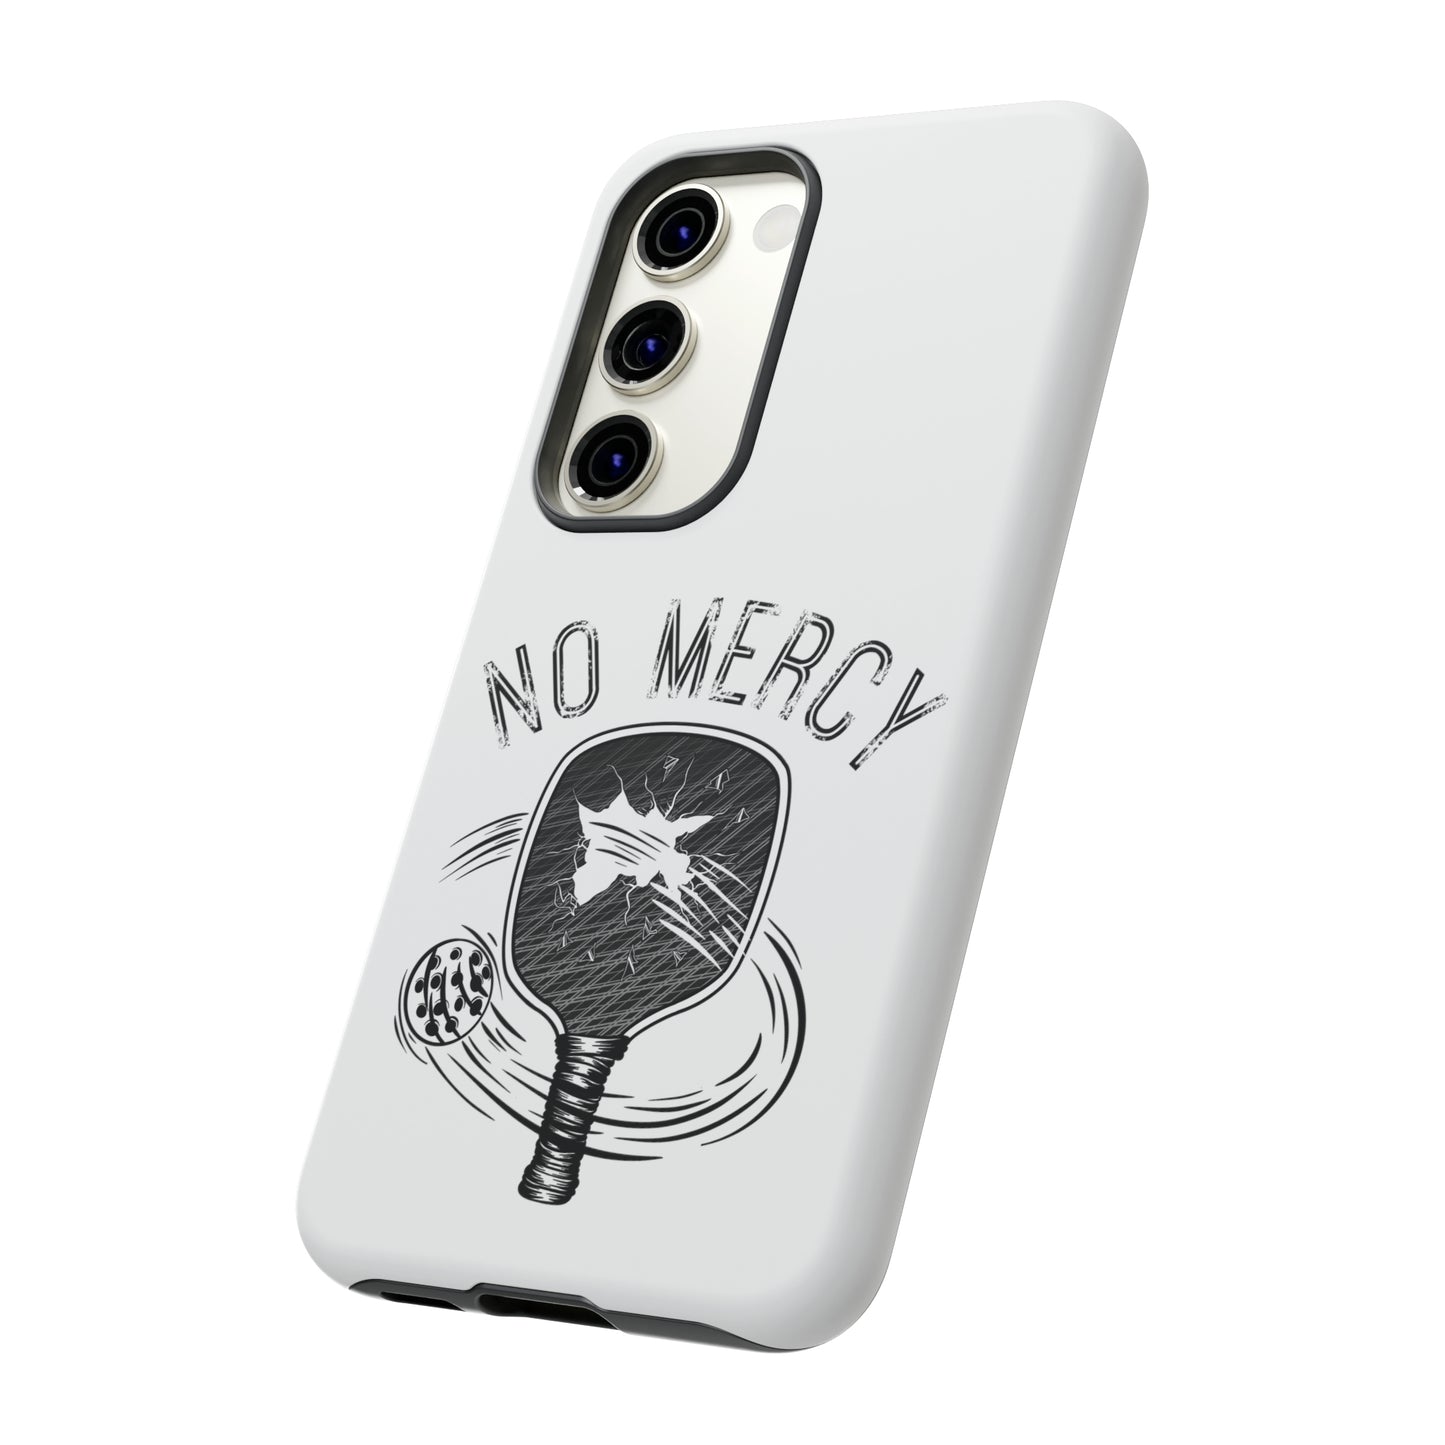 No Mercy Pickleball Series - Tough Dual-Layer Phone Case for Samsung Galaxy